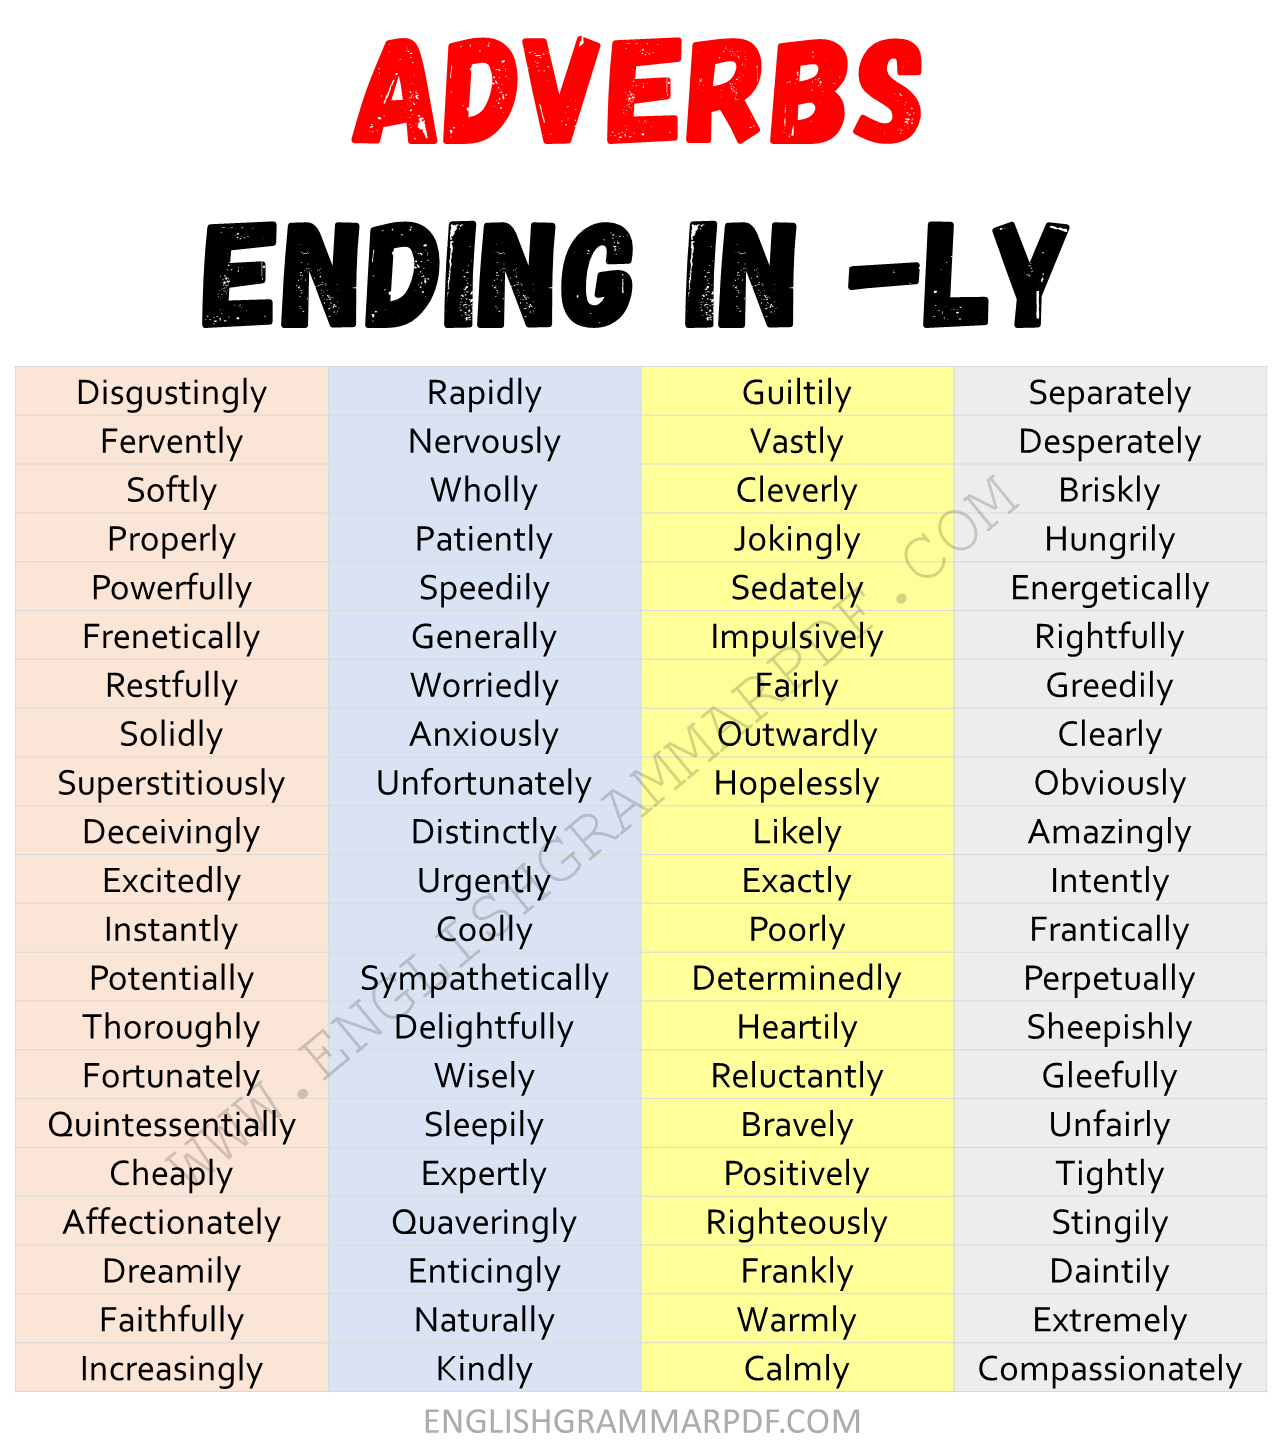 List of Adverbs Ending in Ly